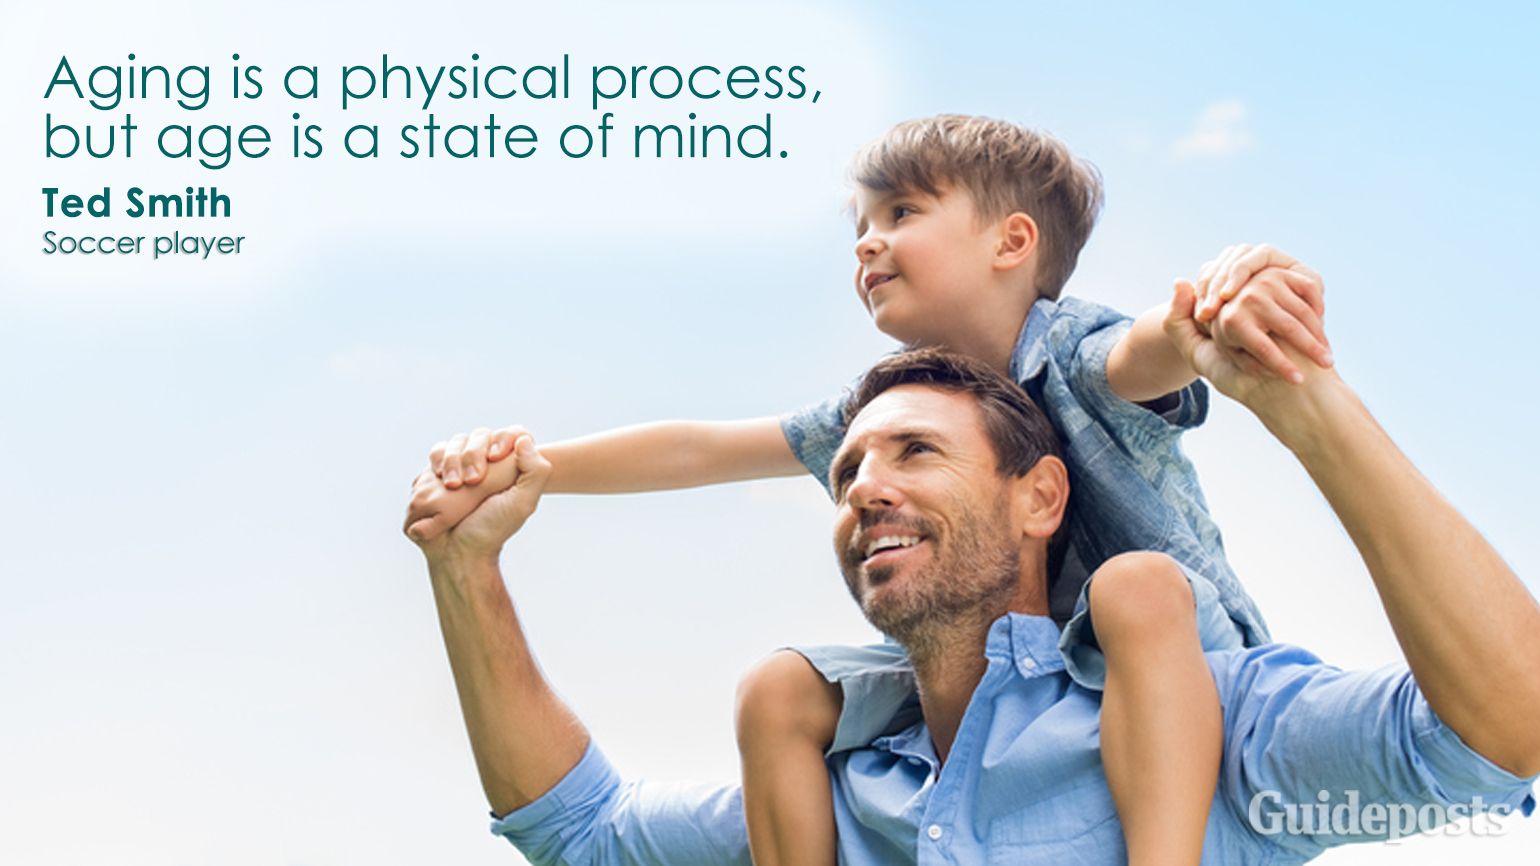 Aging is a physical process, but age is a state of mind.